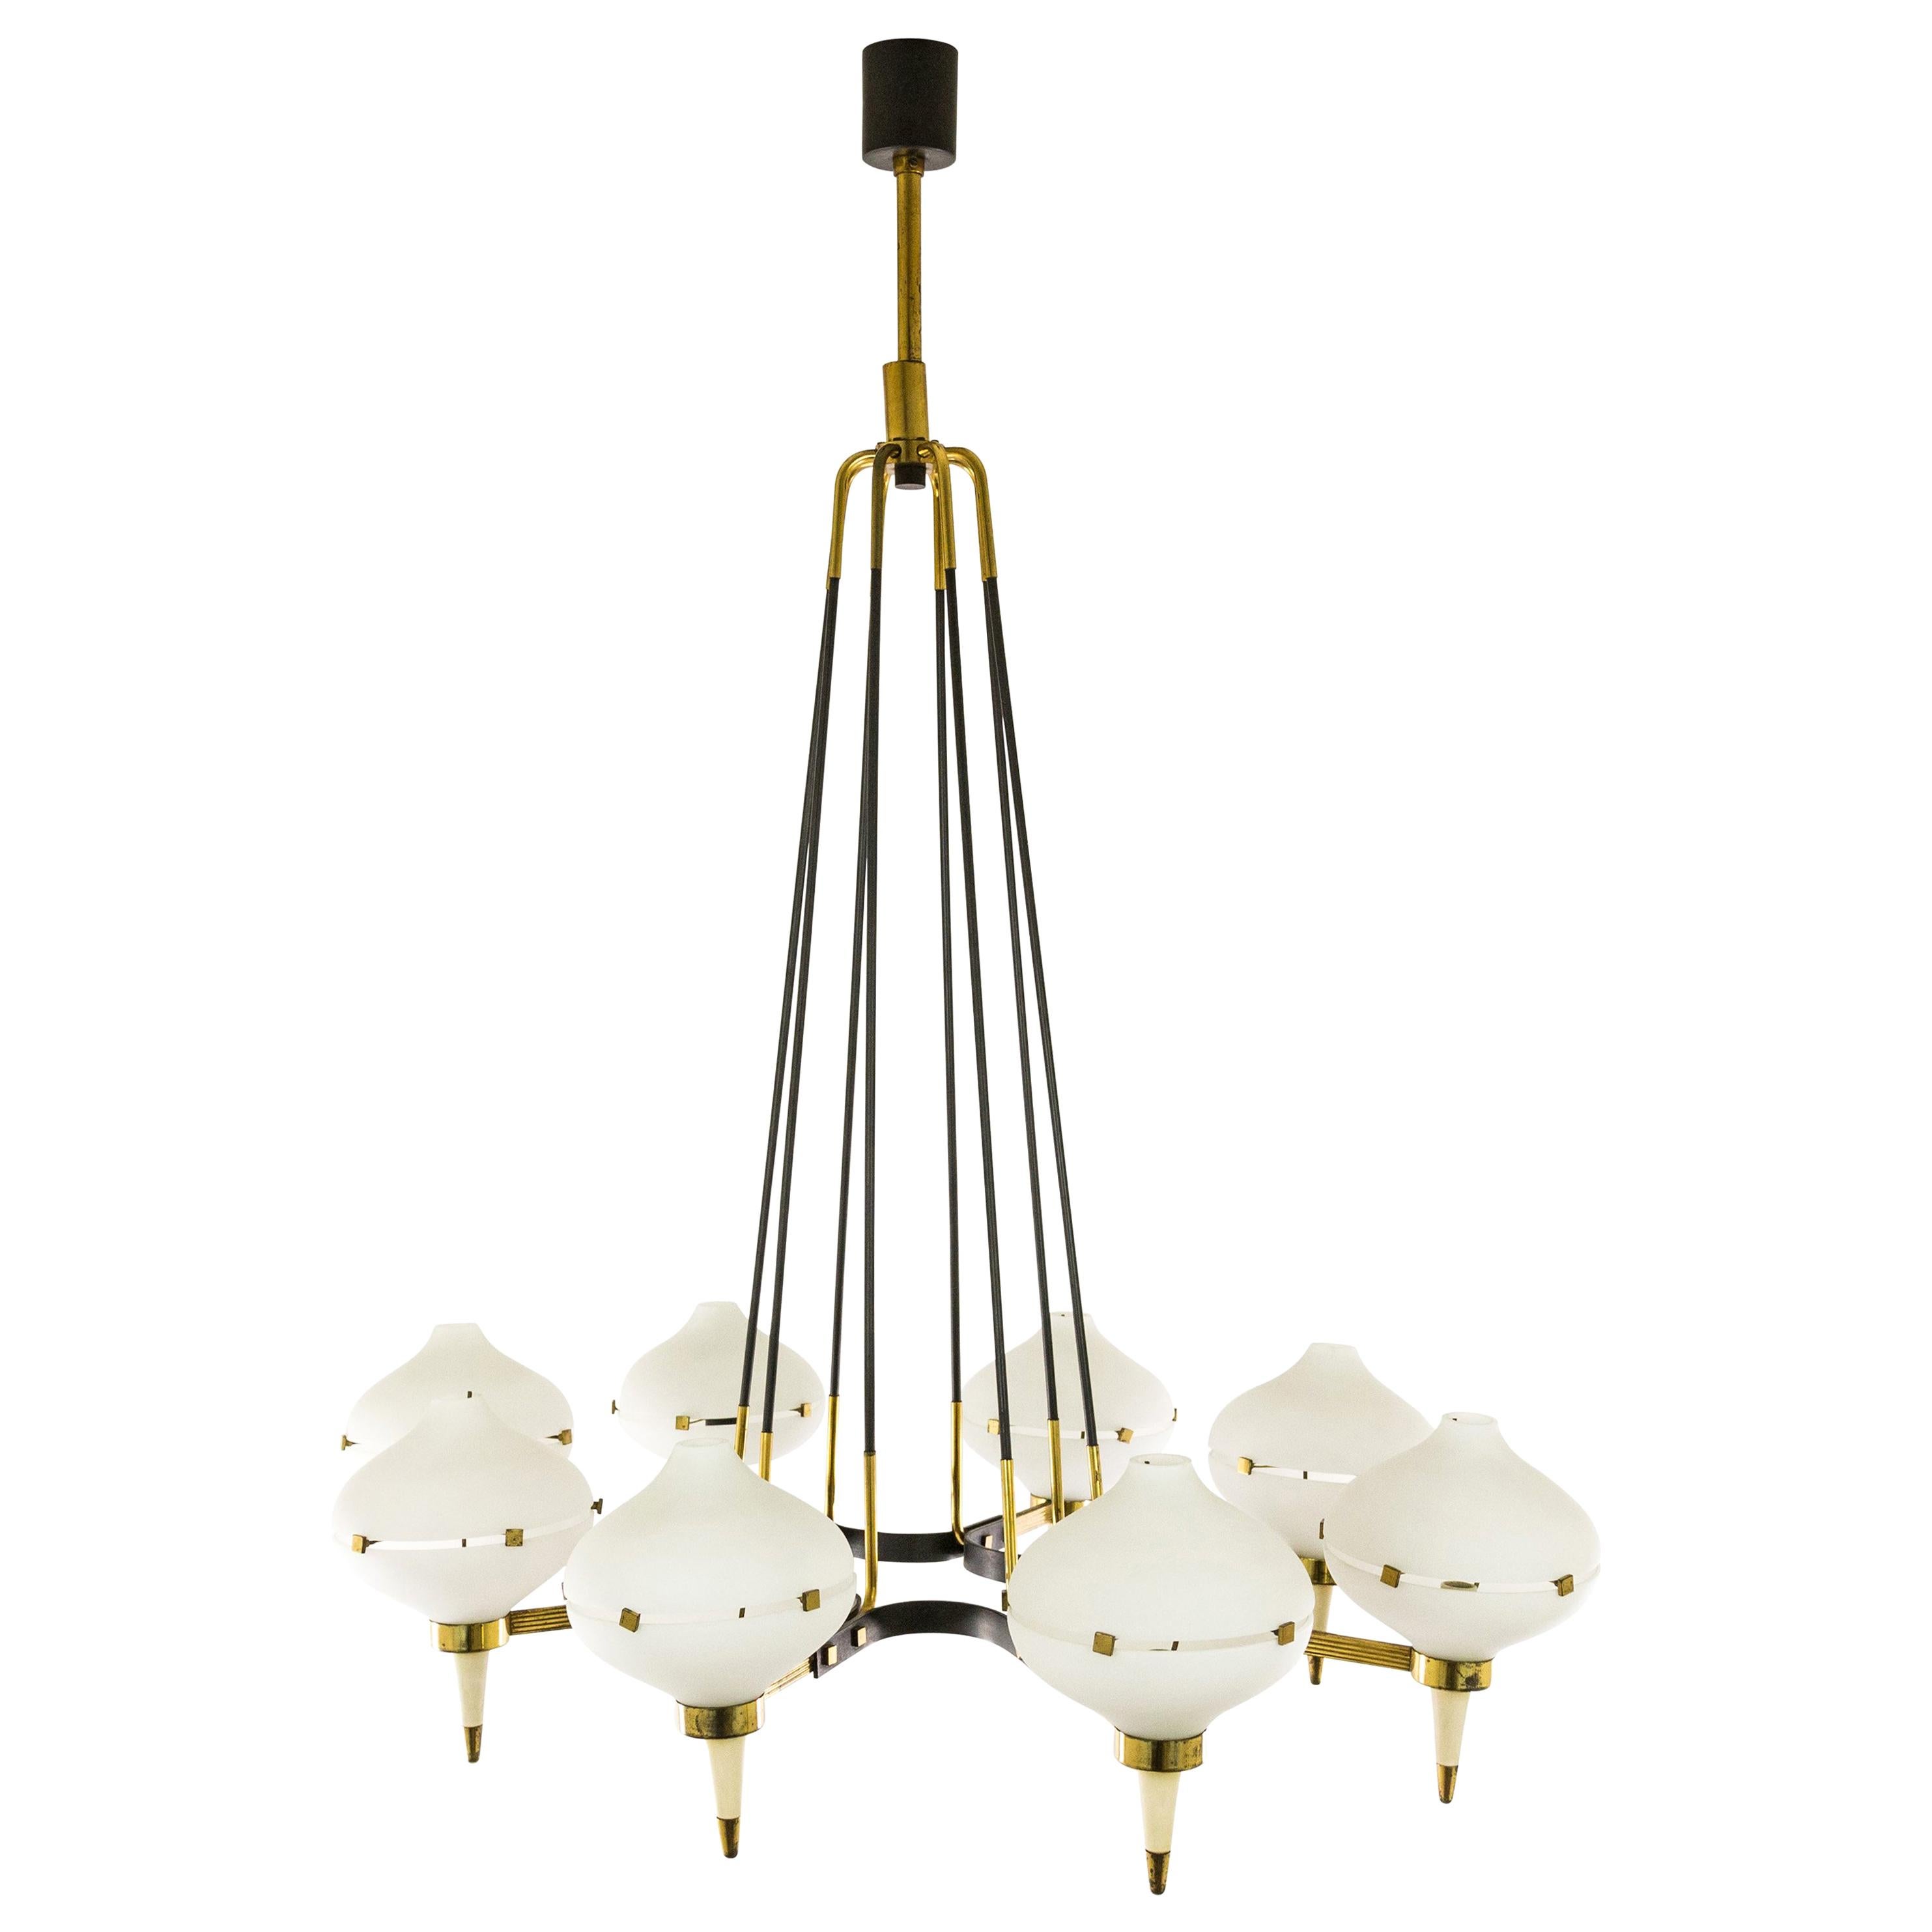 Chandelier in Metal, Brass and Glass, attributed to Stilnovo, circa 1958